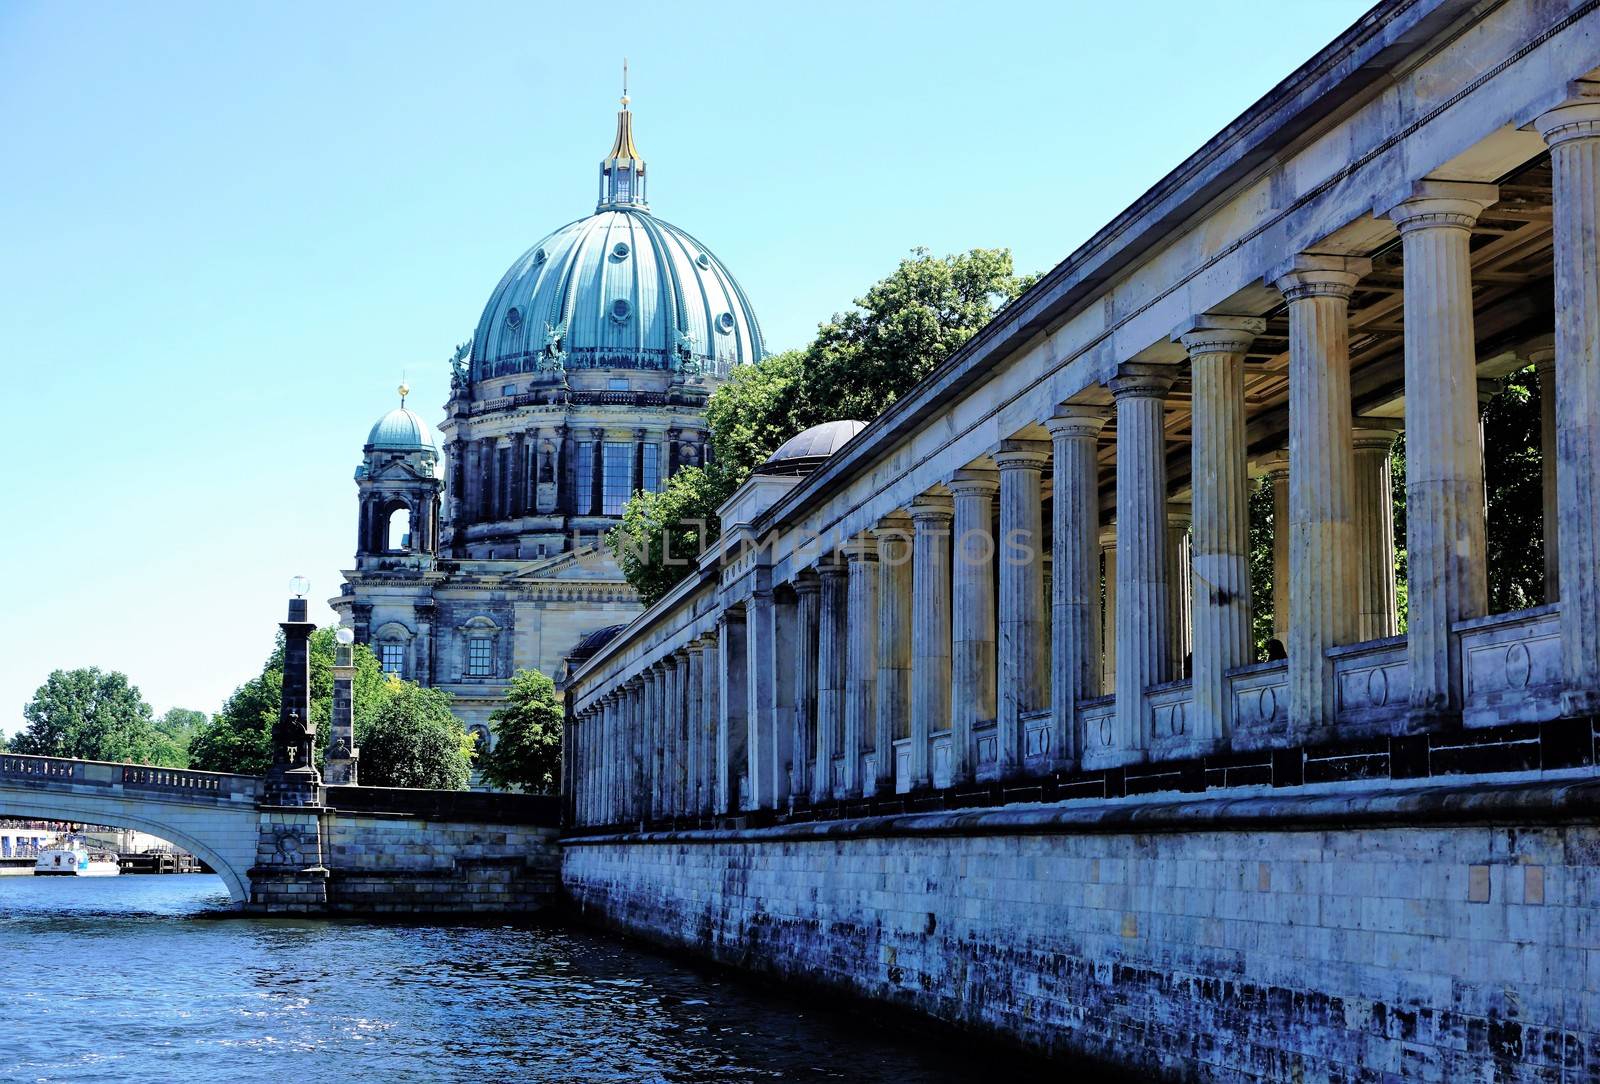 Berlin - cathedral, Spree river and museum by pisces2386